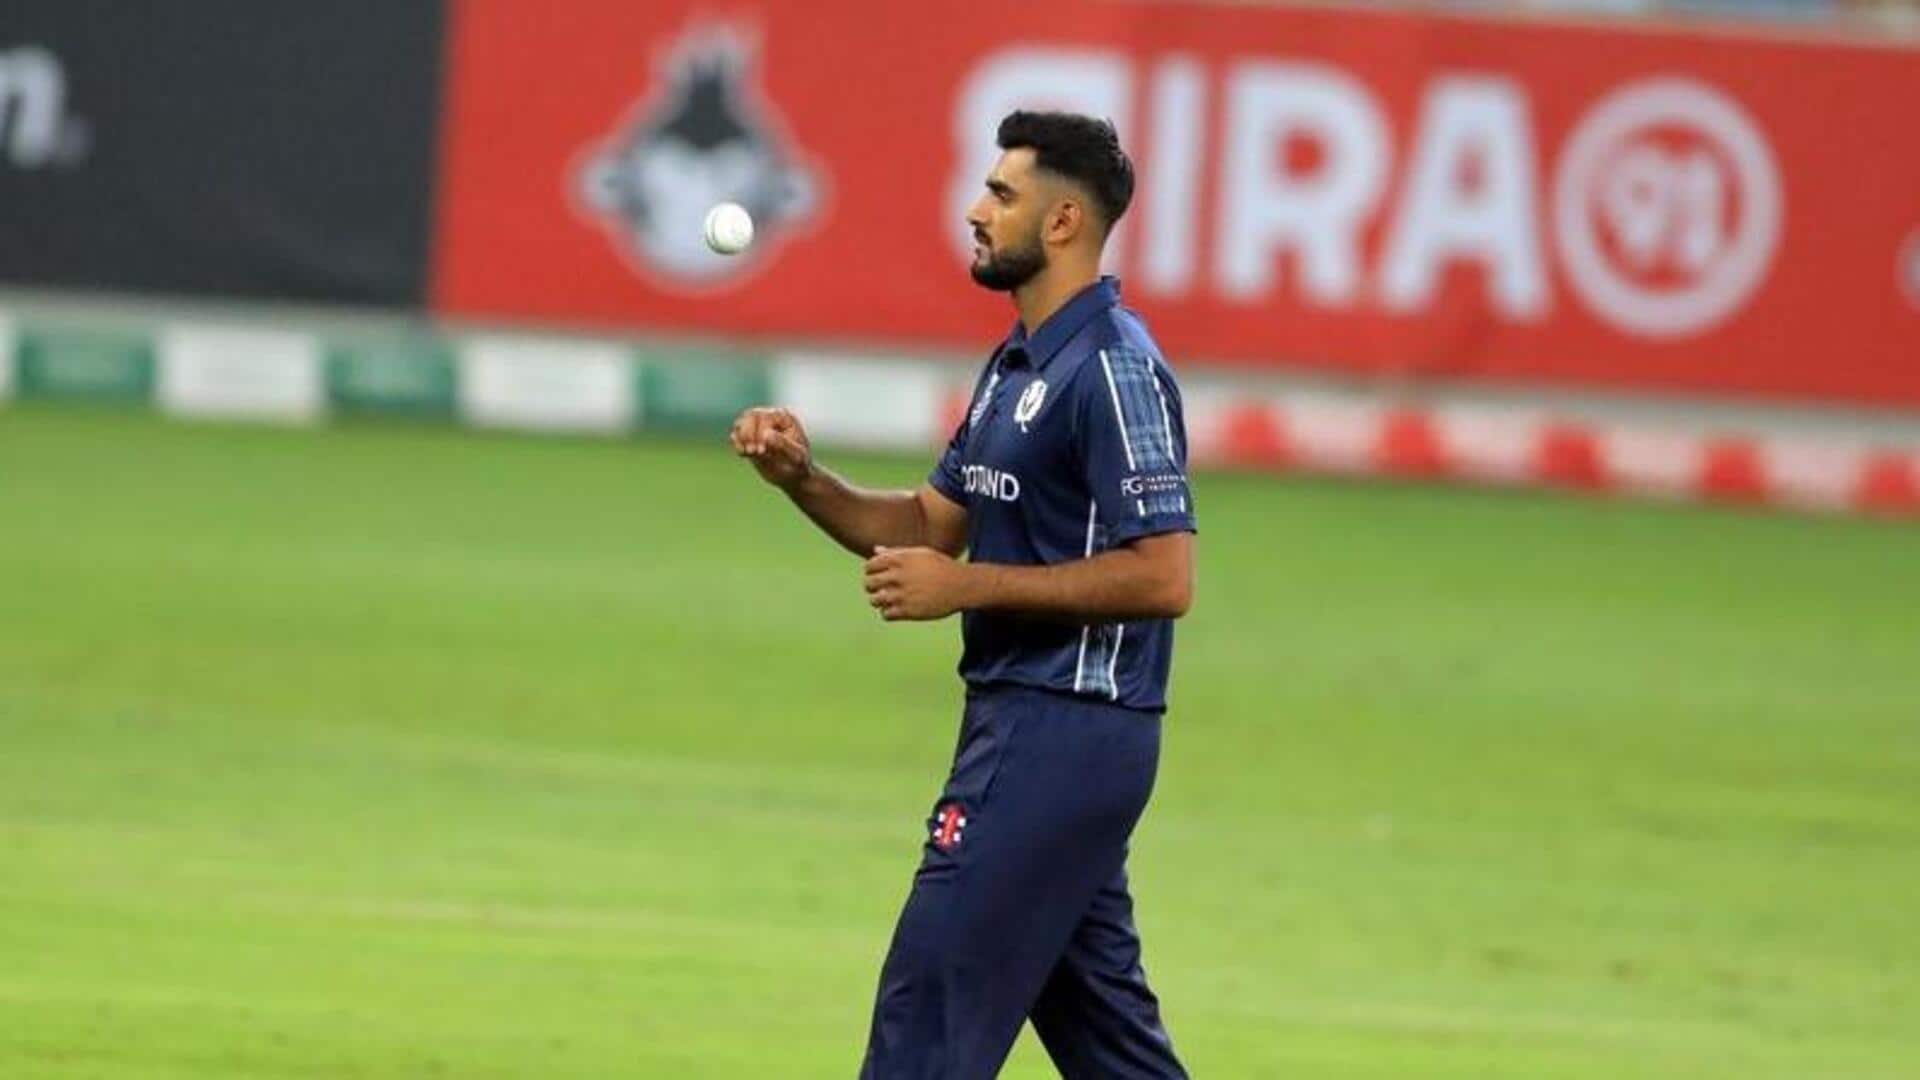 CWC Qualifiers: Scotland's Safyaan Sharif claims 4/20 against UAE